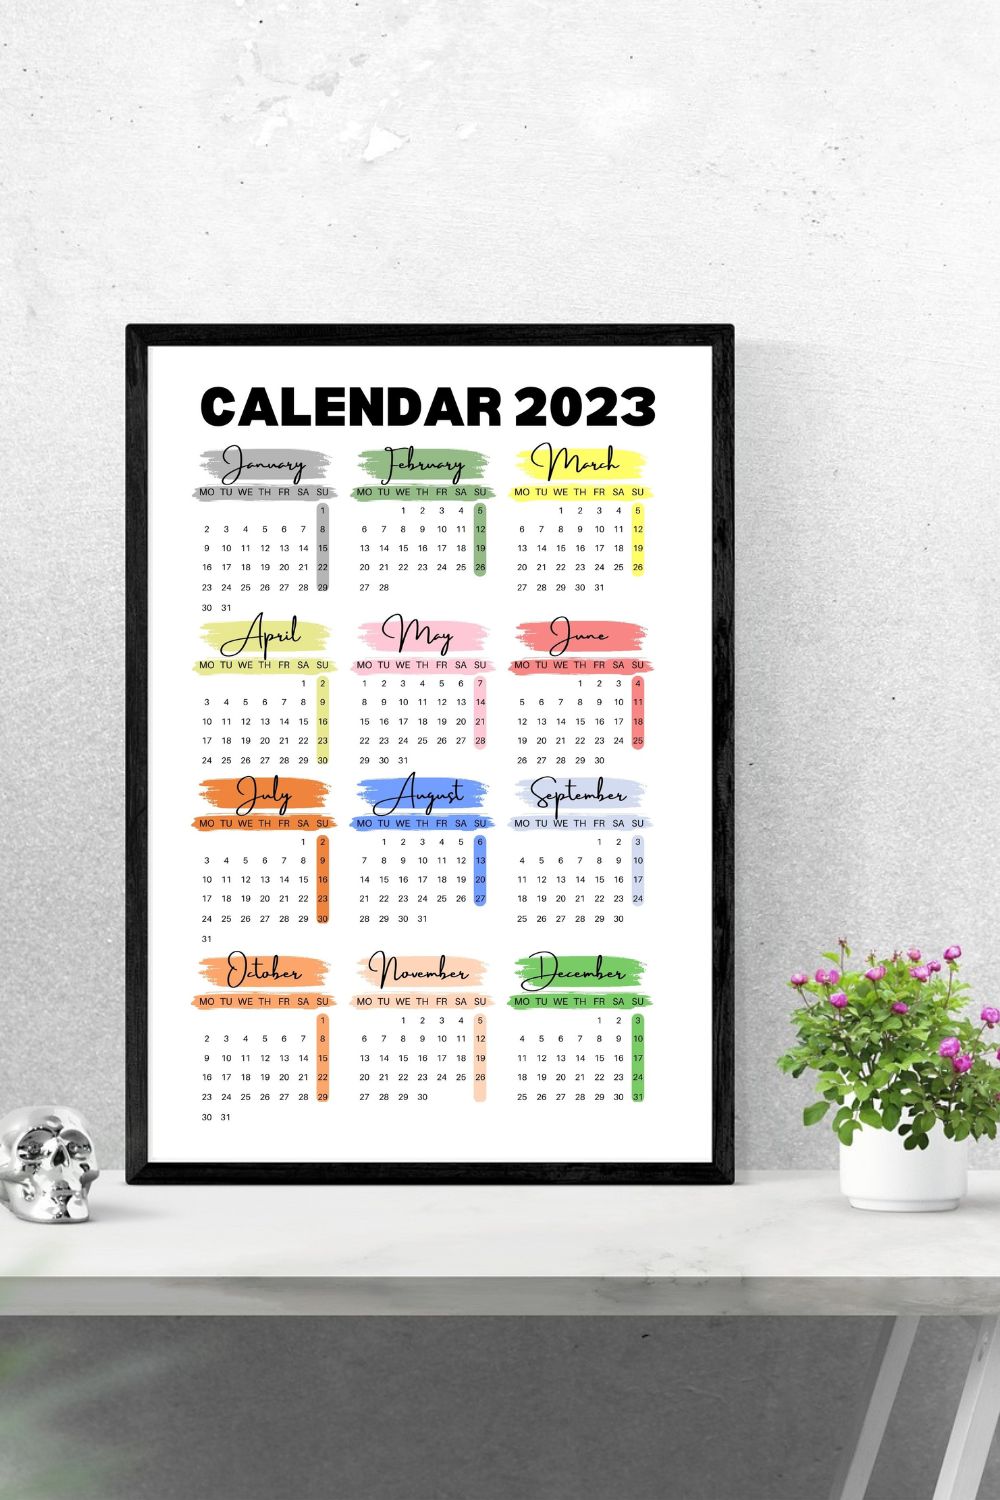 Simple calendar with colorful months.